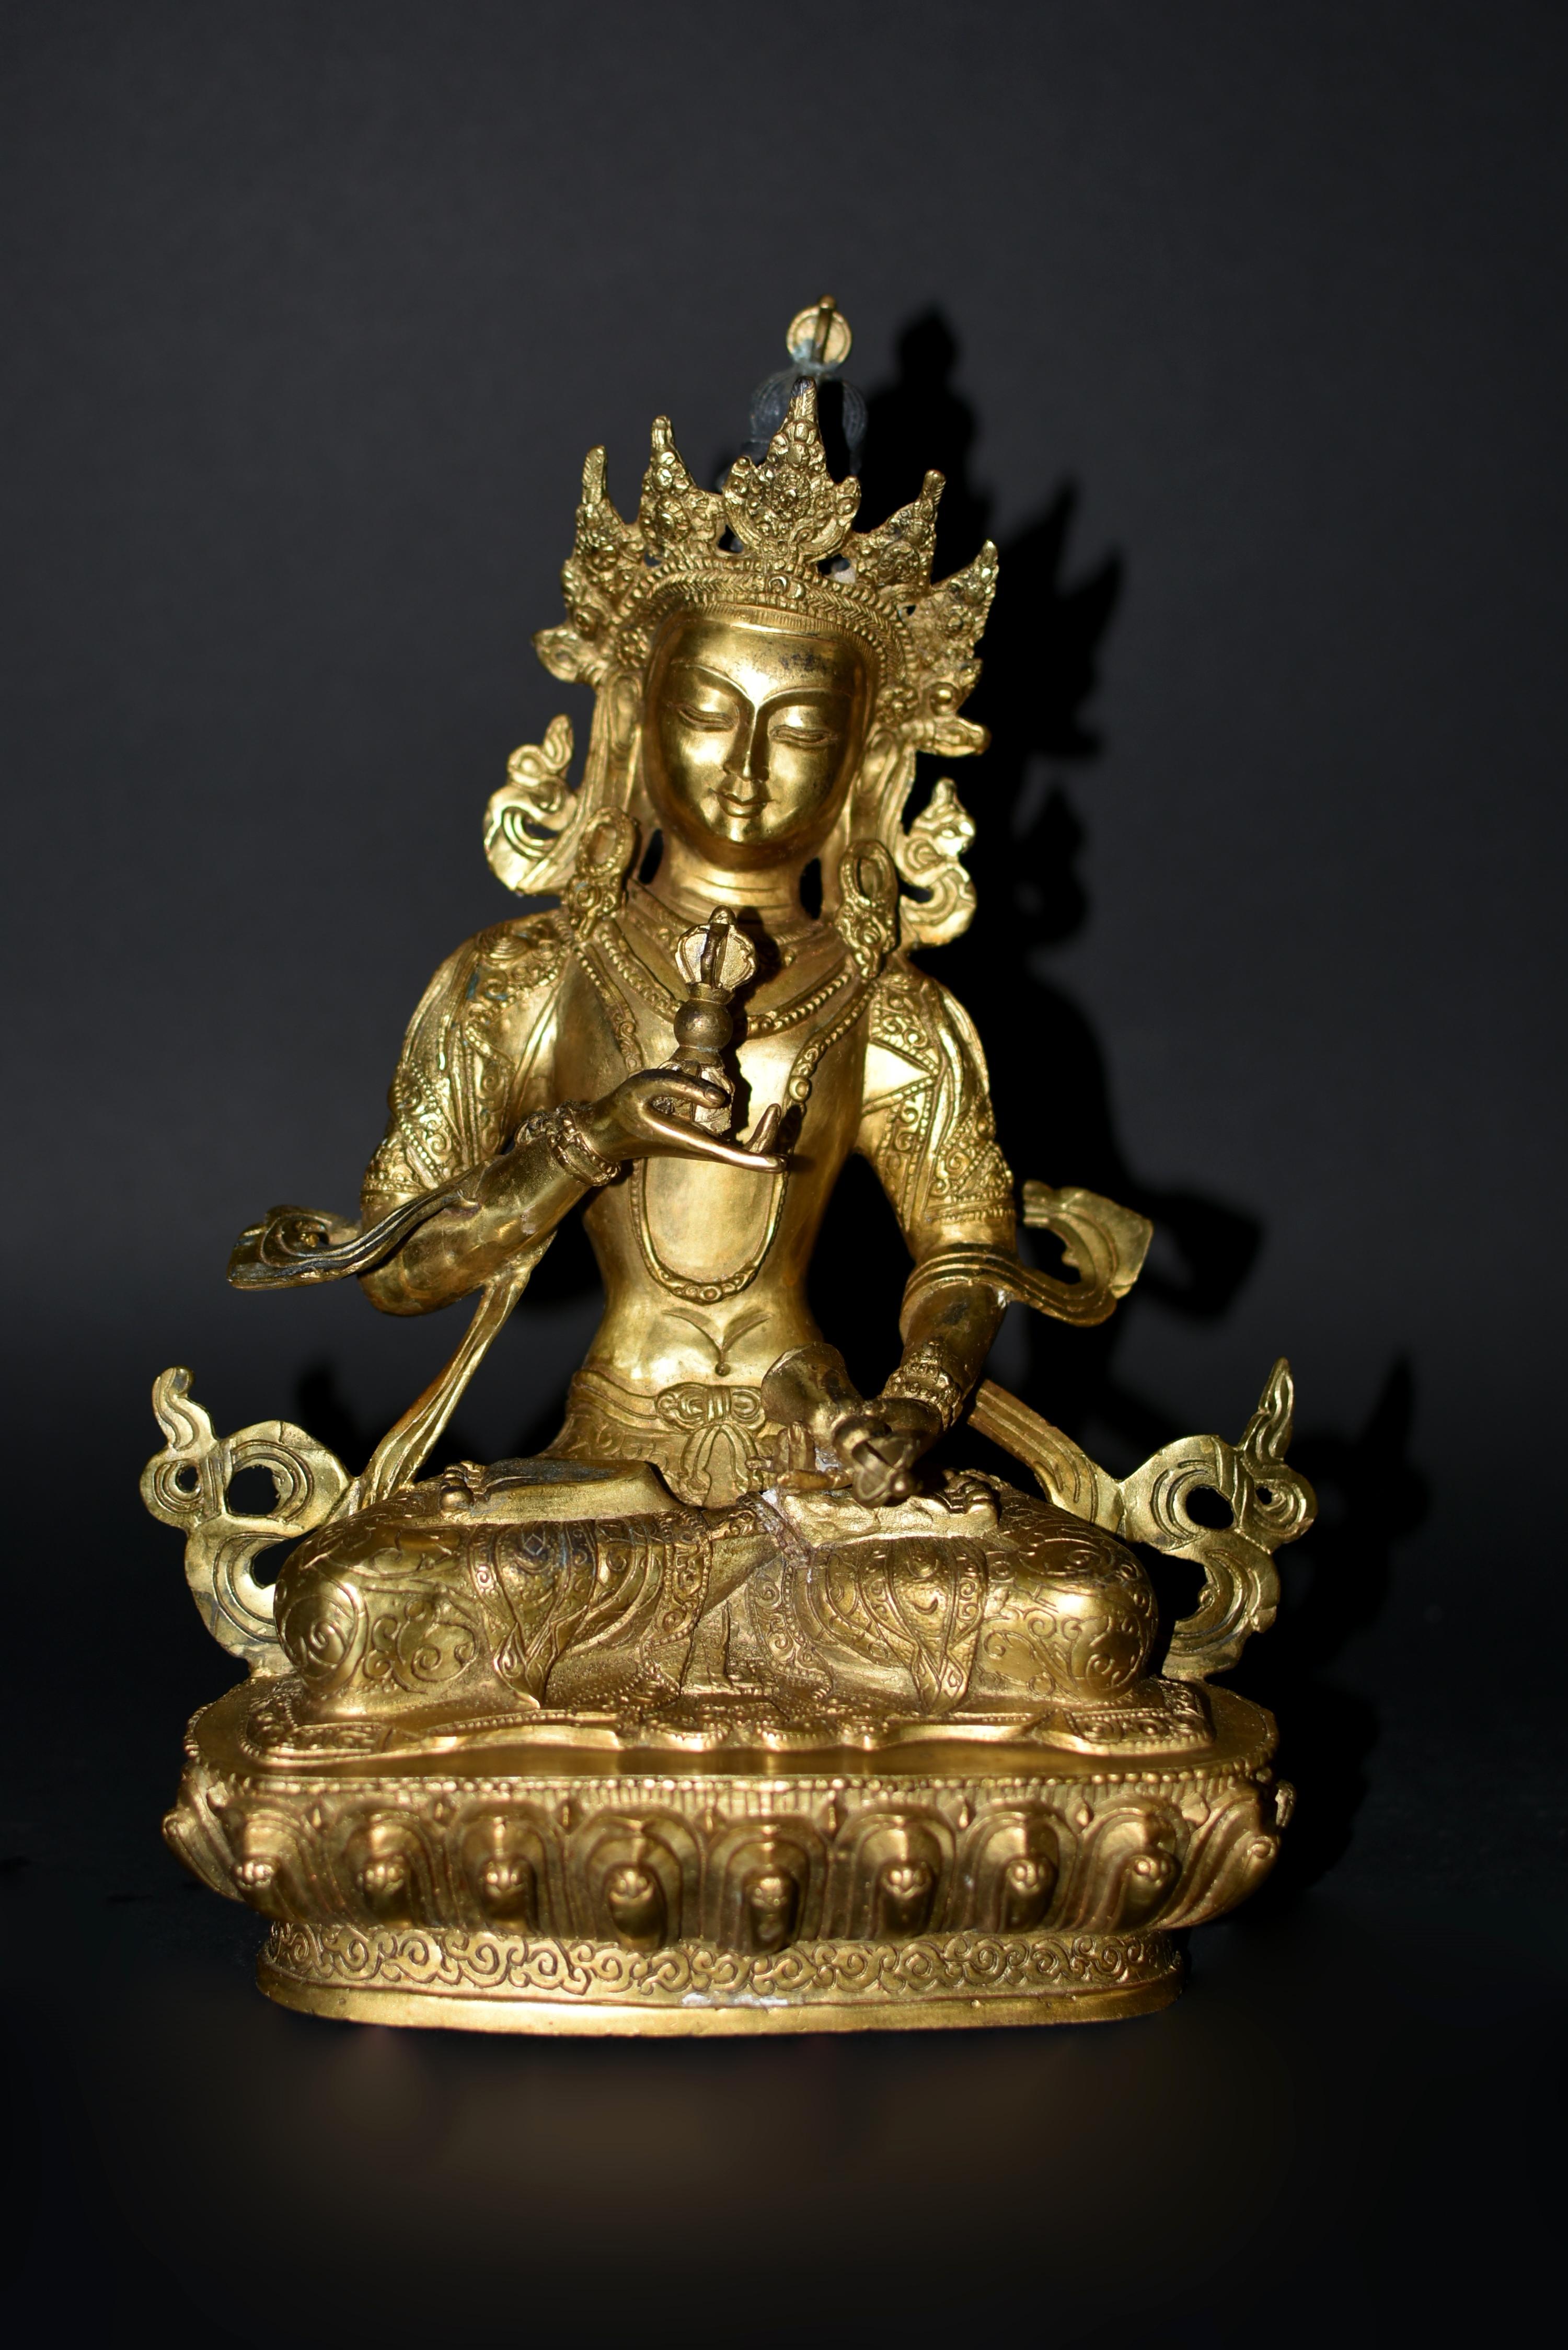 A beautiful gilt bronze Tibetan Vajrasattva statue. The serene face with large downcast eyes under arched eyebrows above pursed lips, flanked by long earlobes, under hair tied in double buns and adorned with an elaborate crown. Clad in a embroidered